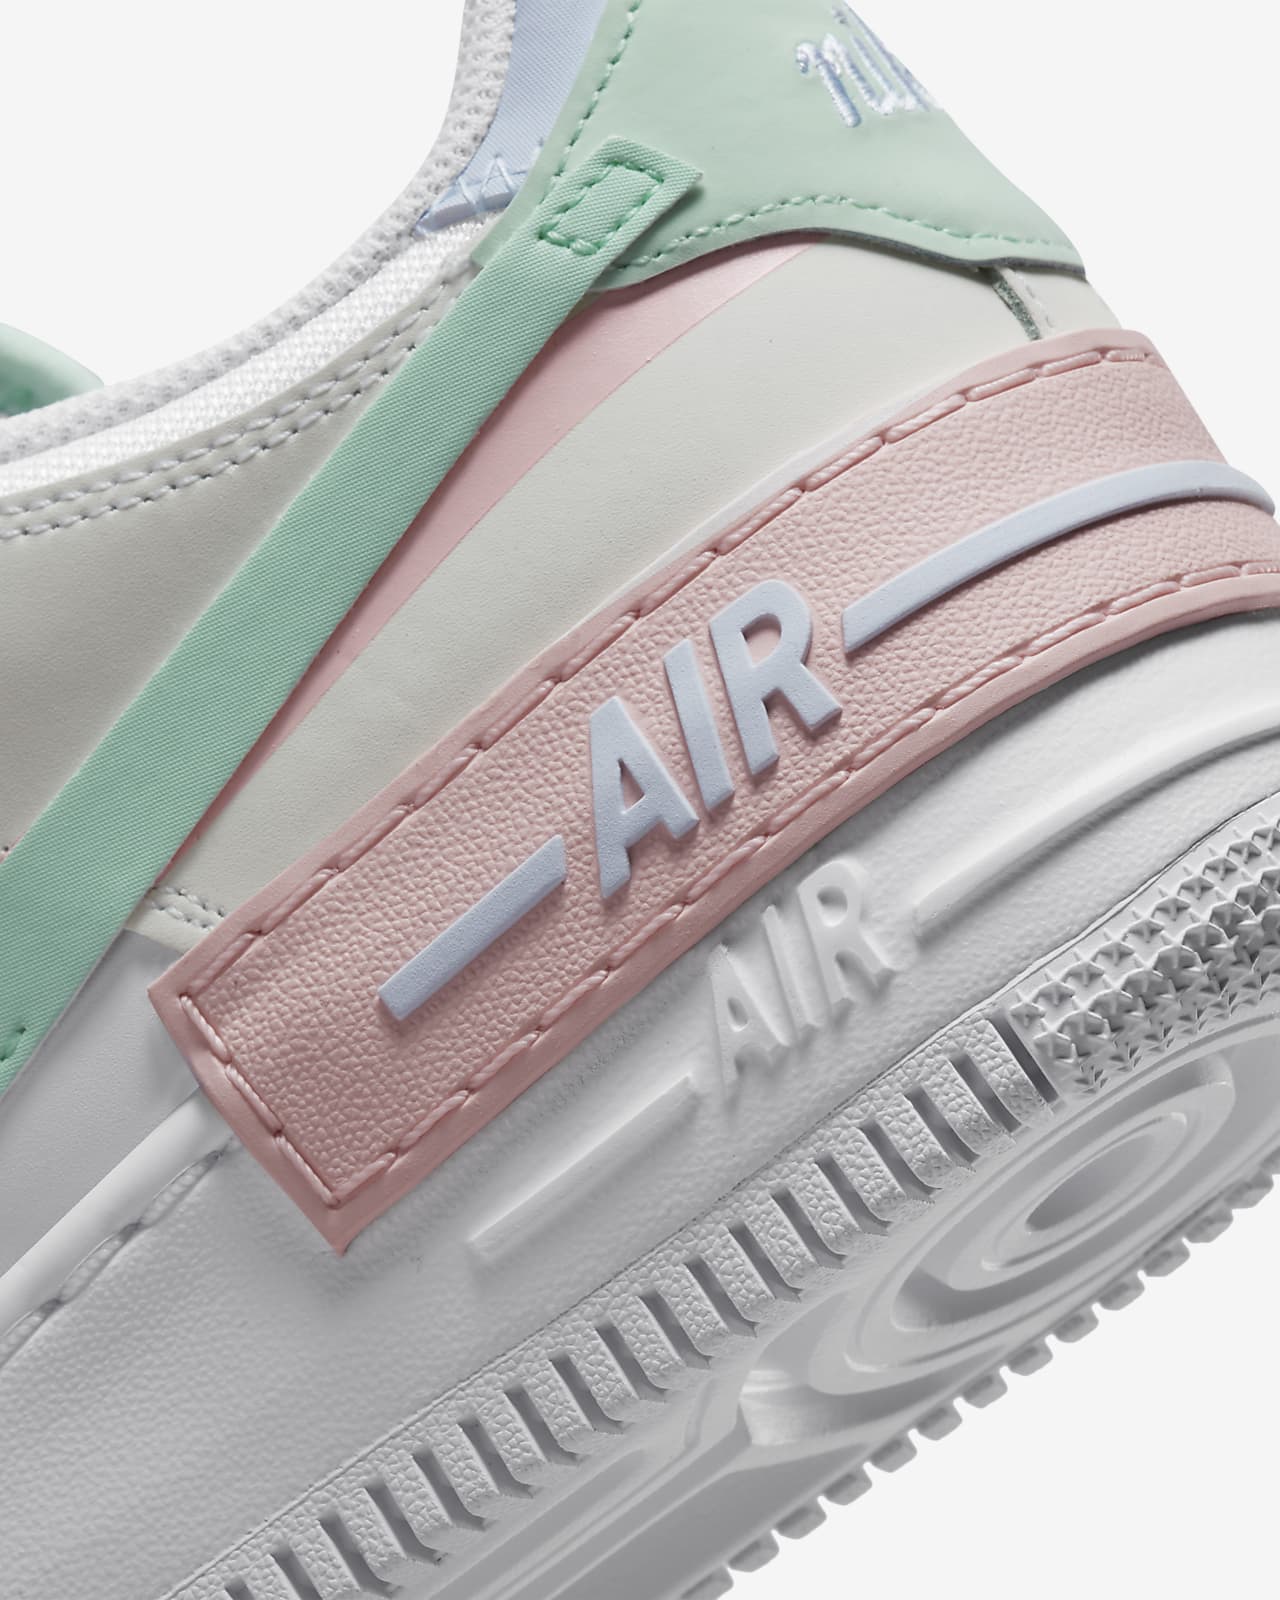 Nike Air Force 1 Shadow trainers in white pink and green